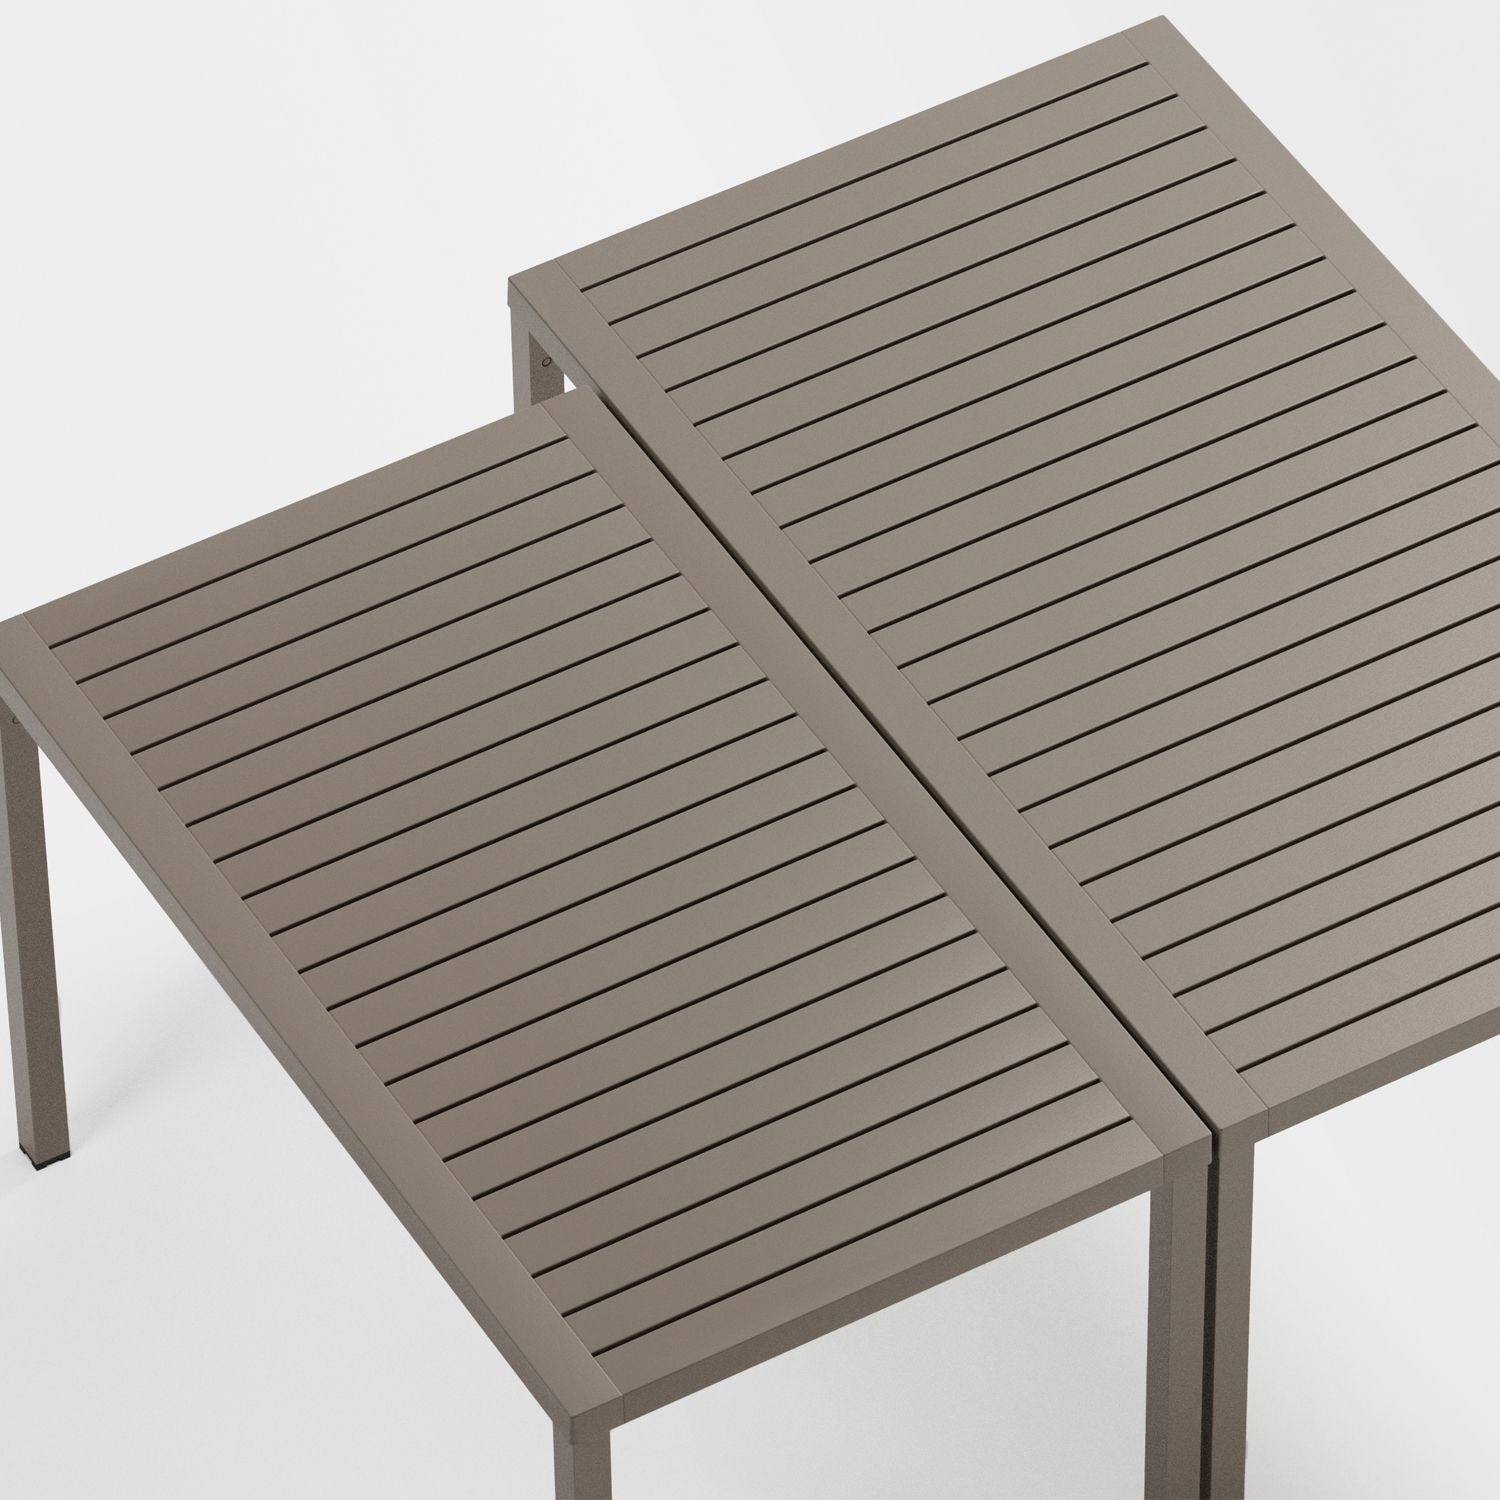 Cube 120x70 Garden Table By Nardi - Taupe